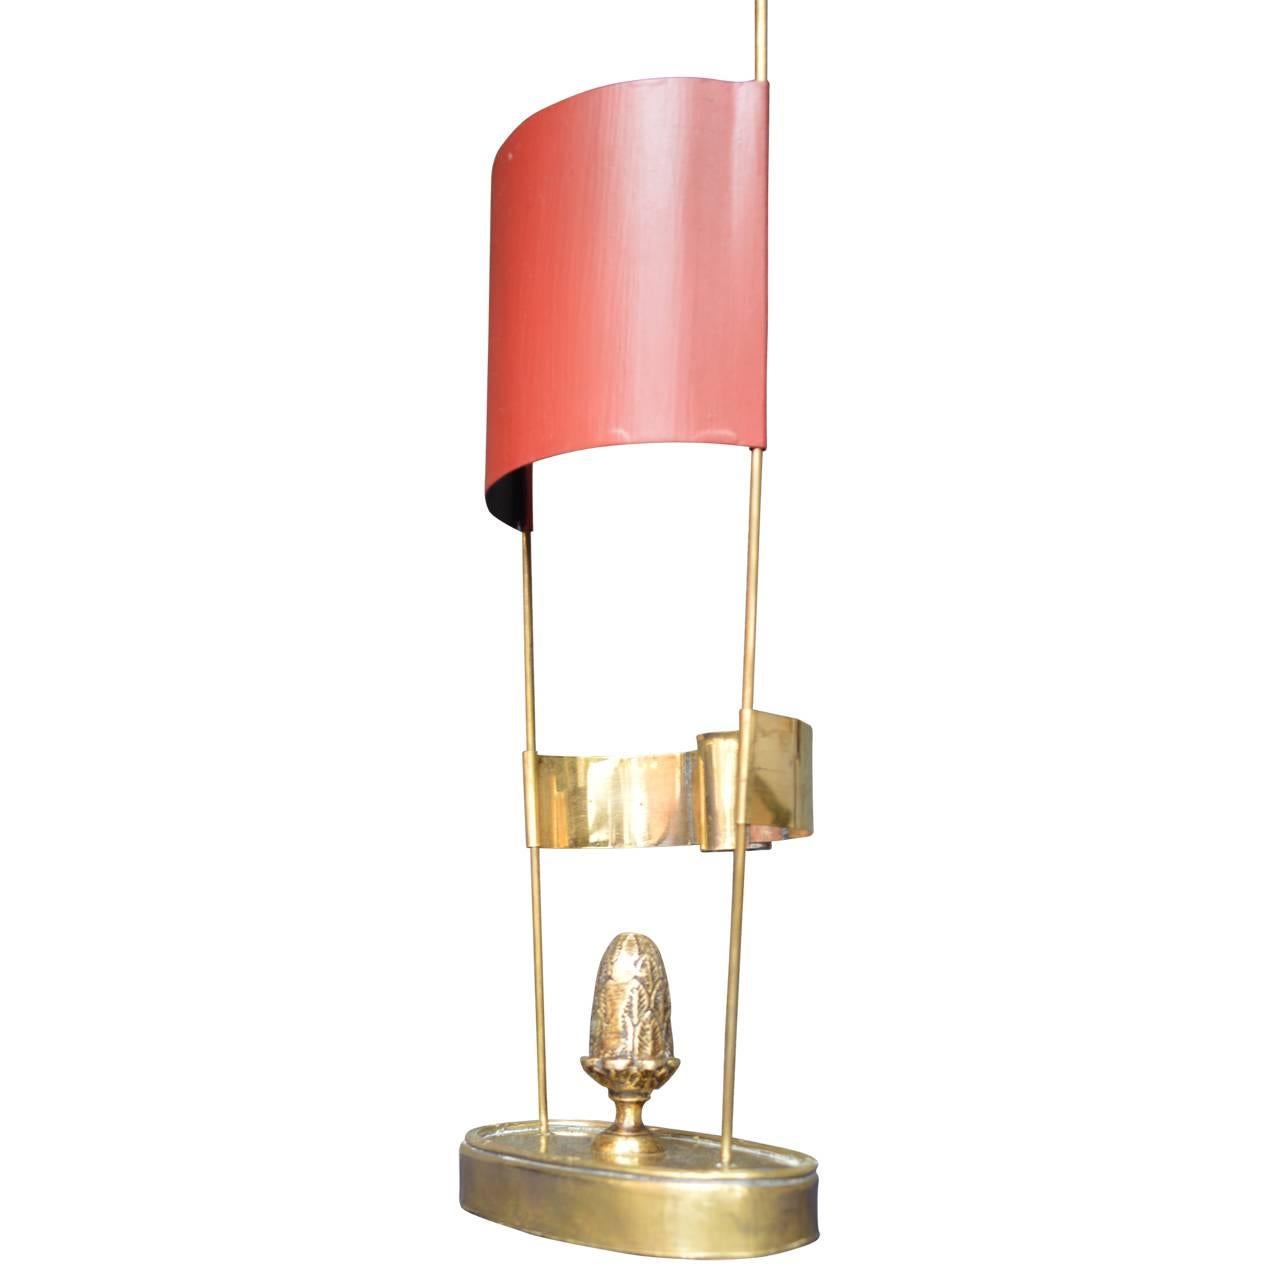 Hand-Painted Small 19th Century Swedish Red Shade Brass Candlestick